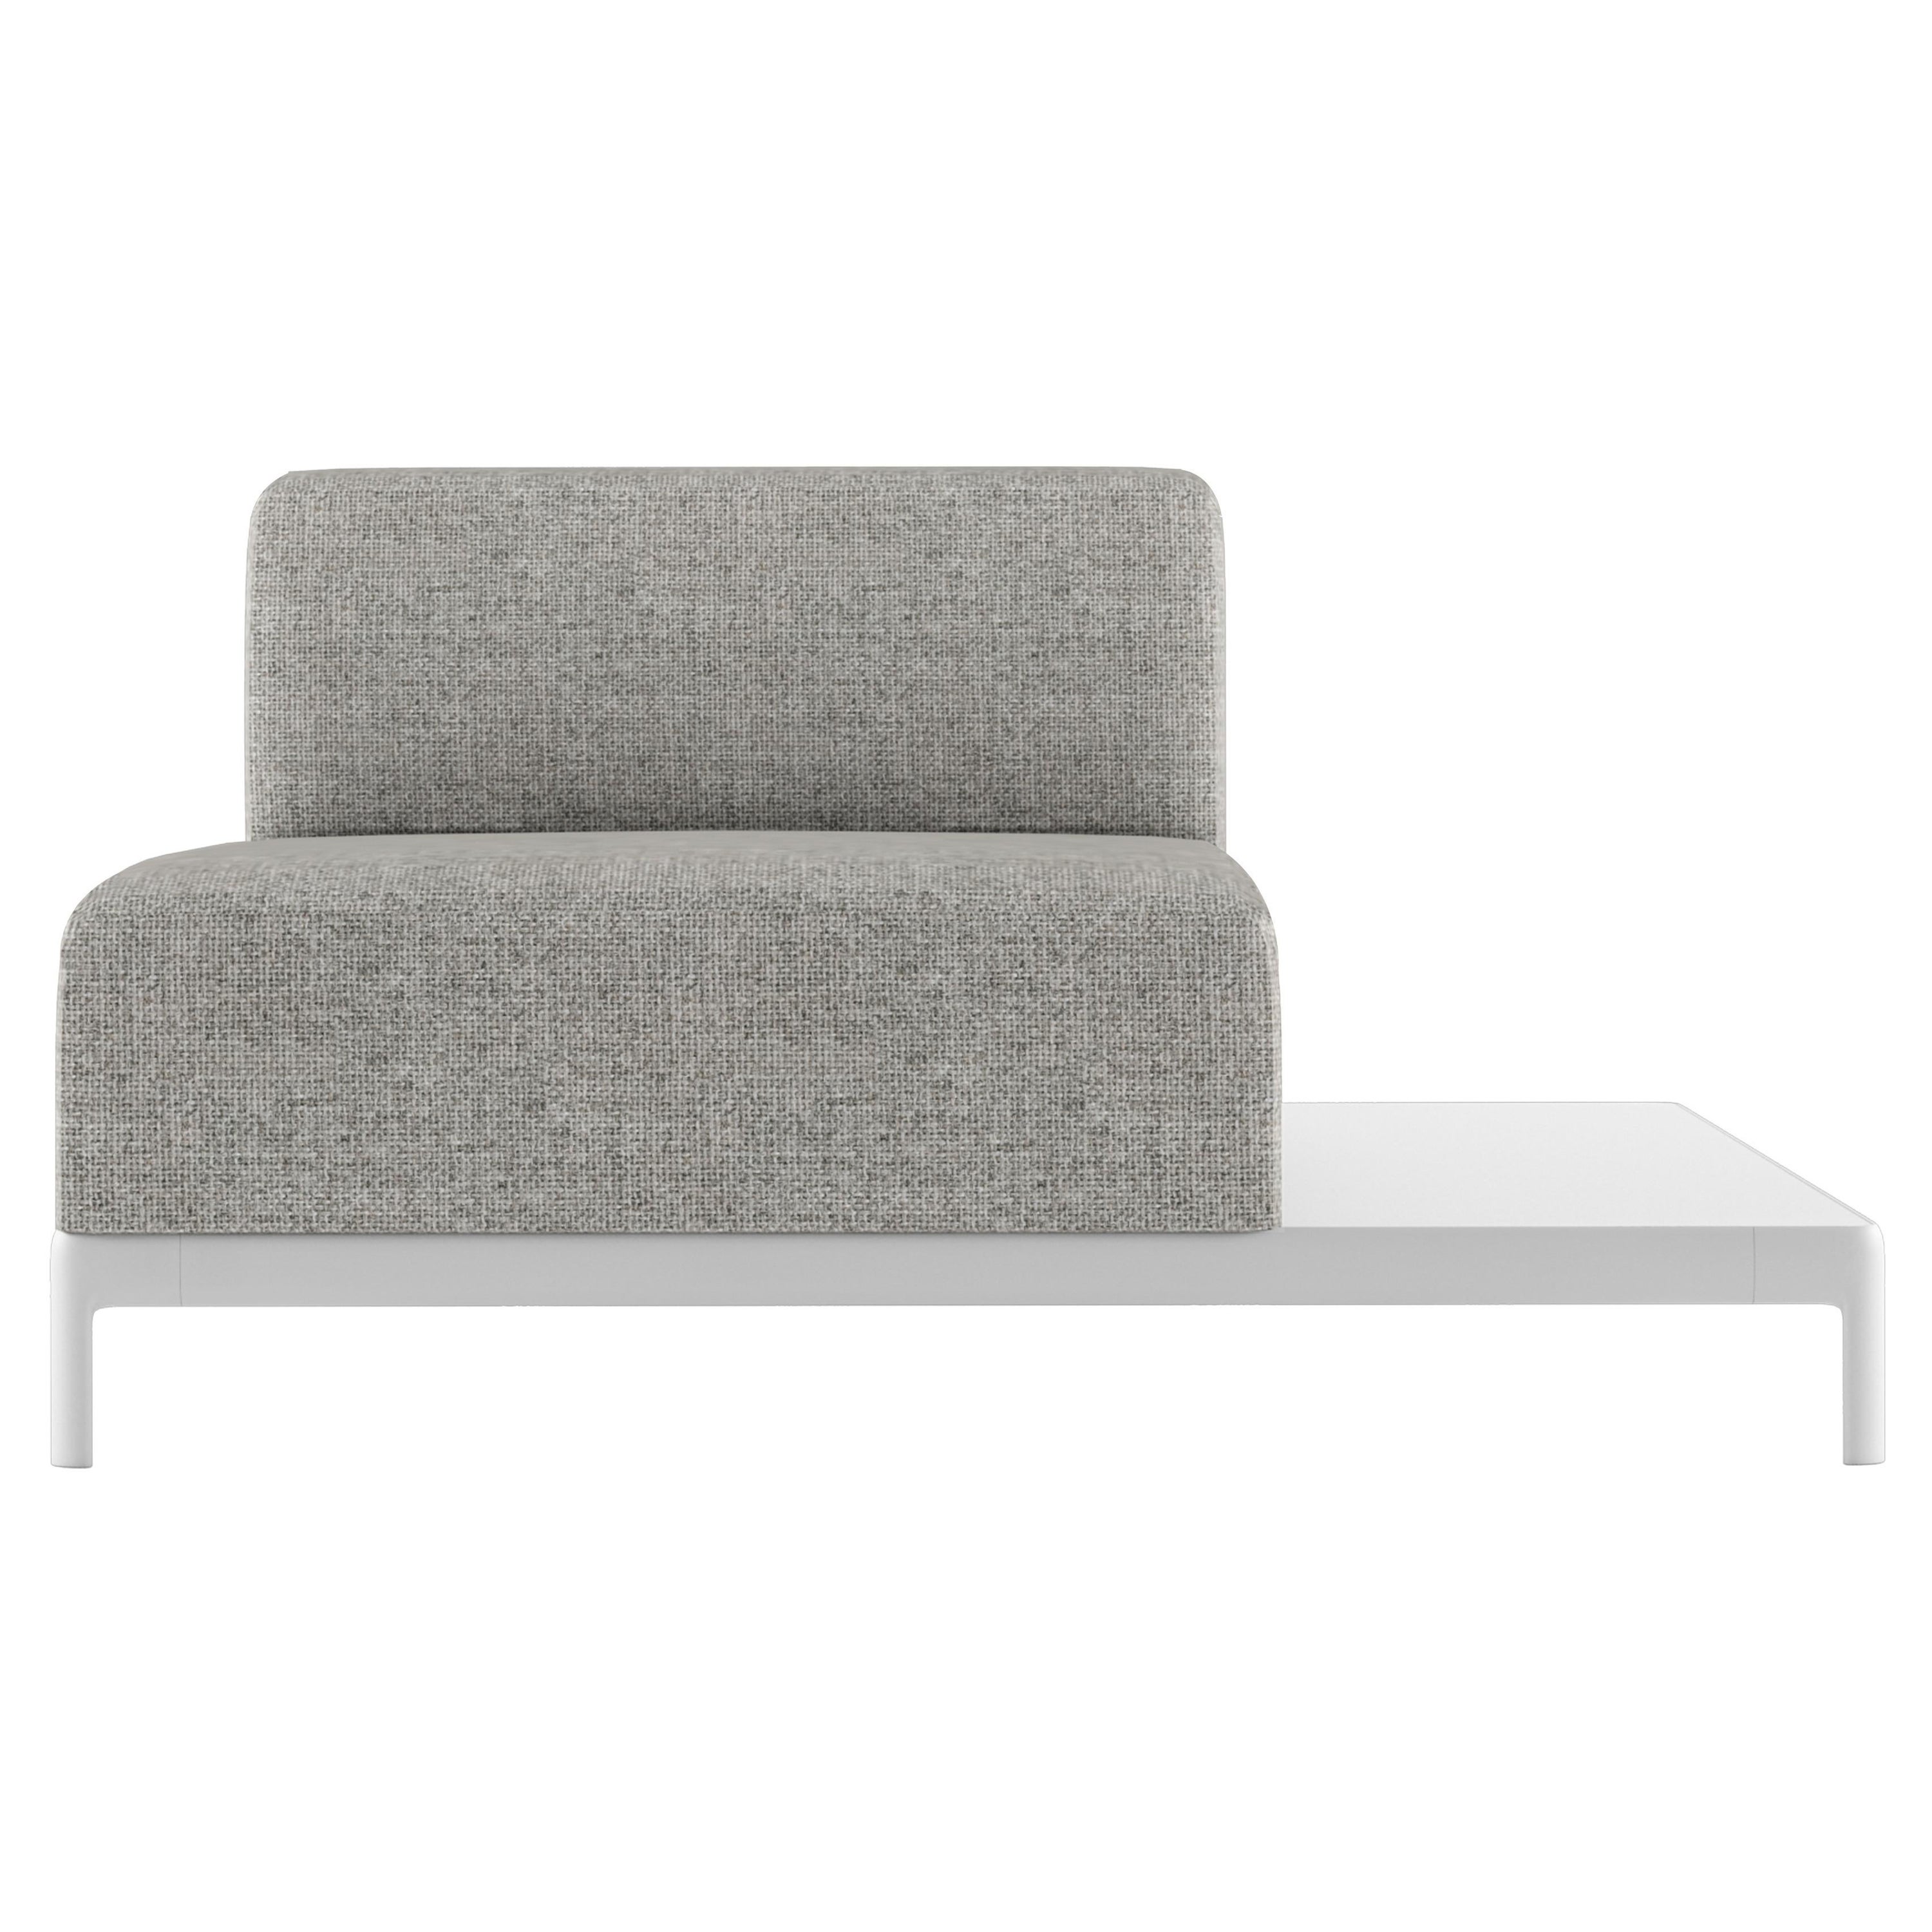 Alias P68 AluZen Soft Top Outdoor Sofa DX in Upholstery with Aluminium Frame For Sale